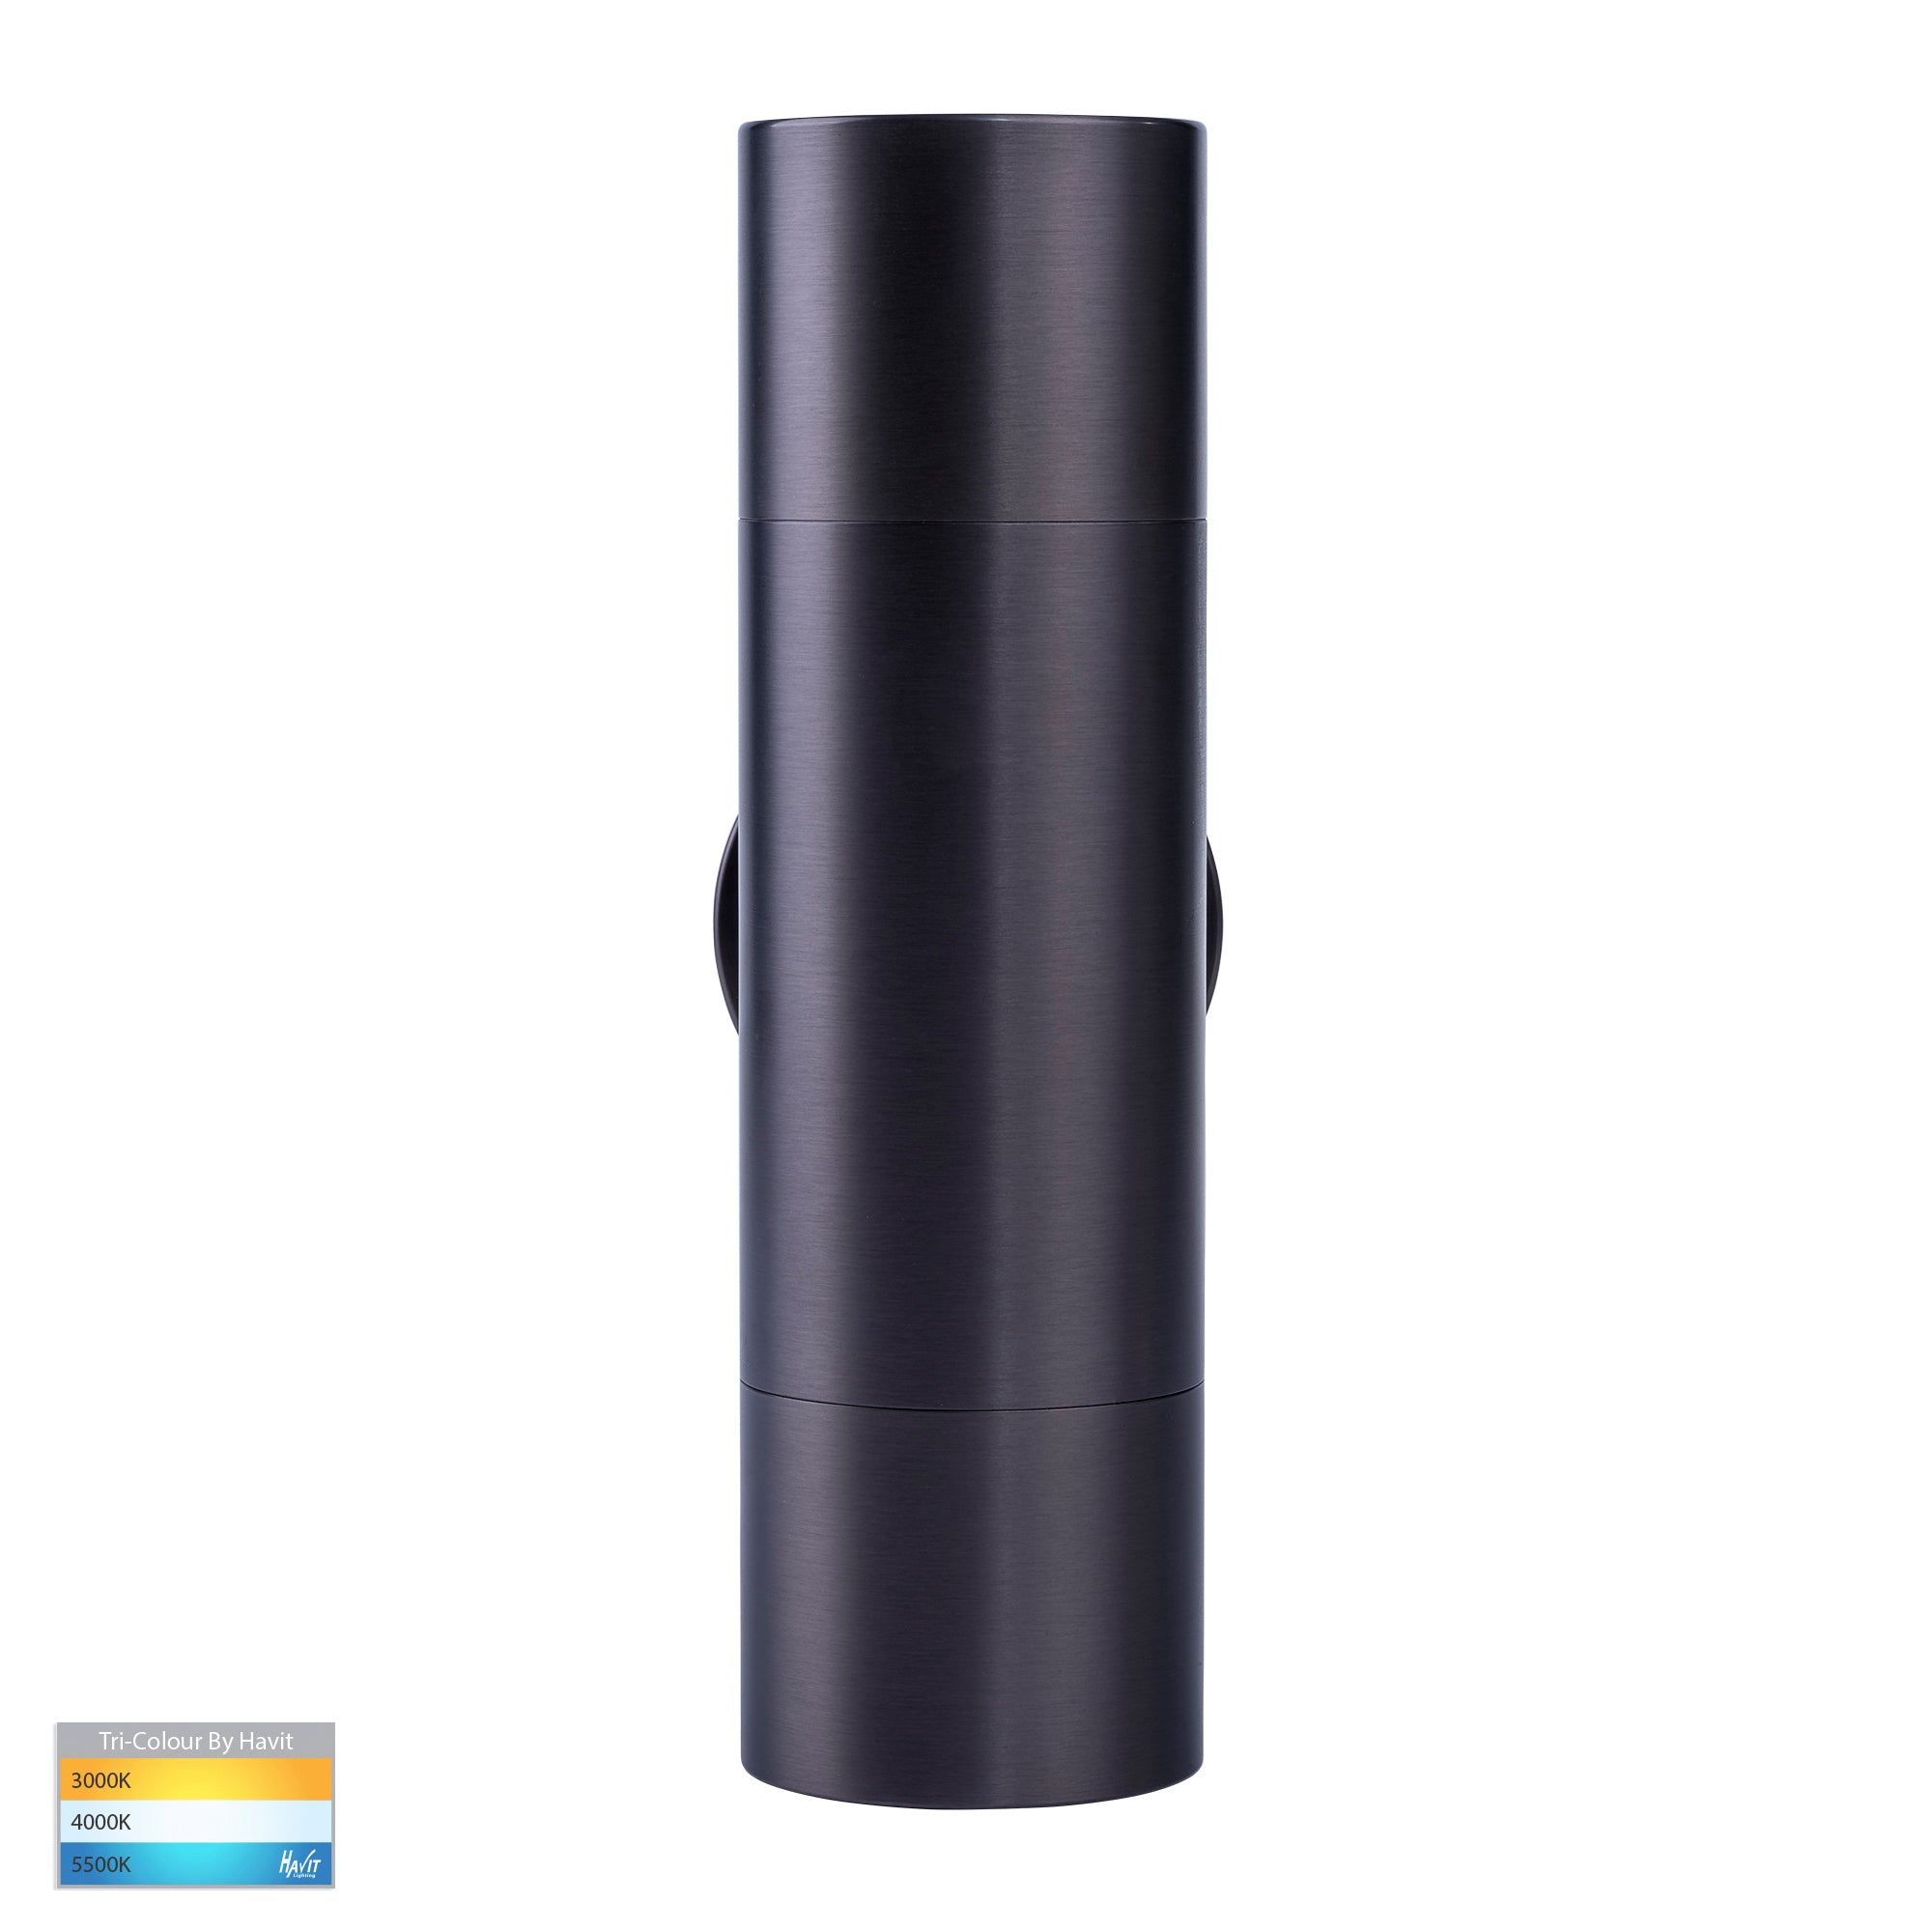 HV1075T-HV1077T - Tivah Solid Brass Graphite Coloured TRI Colour Up & Down Wall Pillar Lights